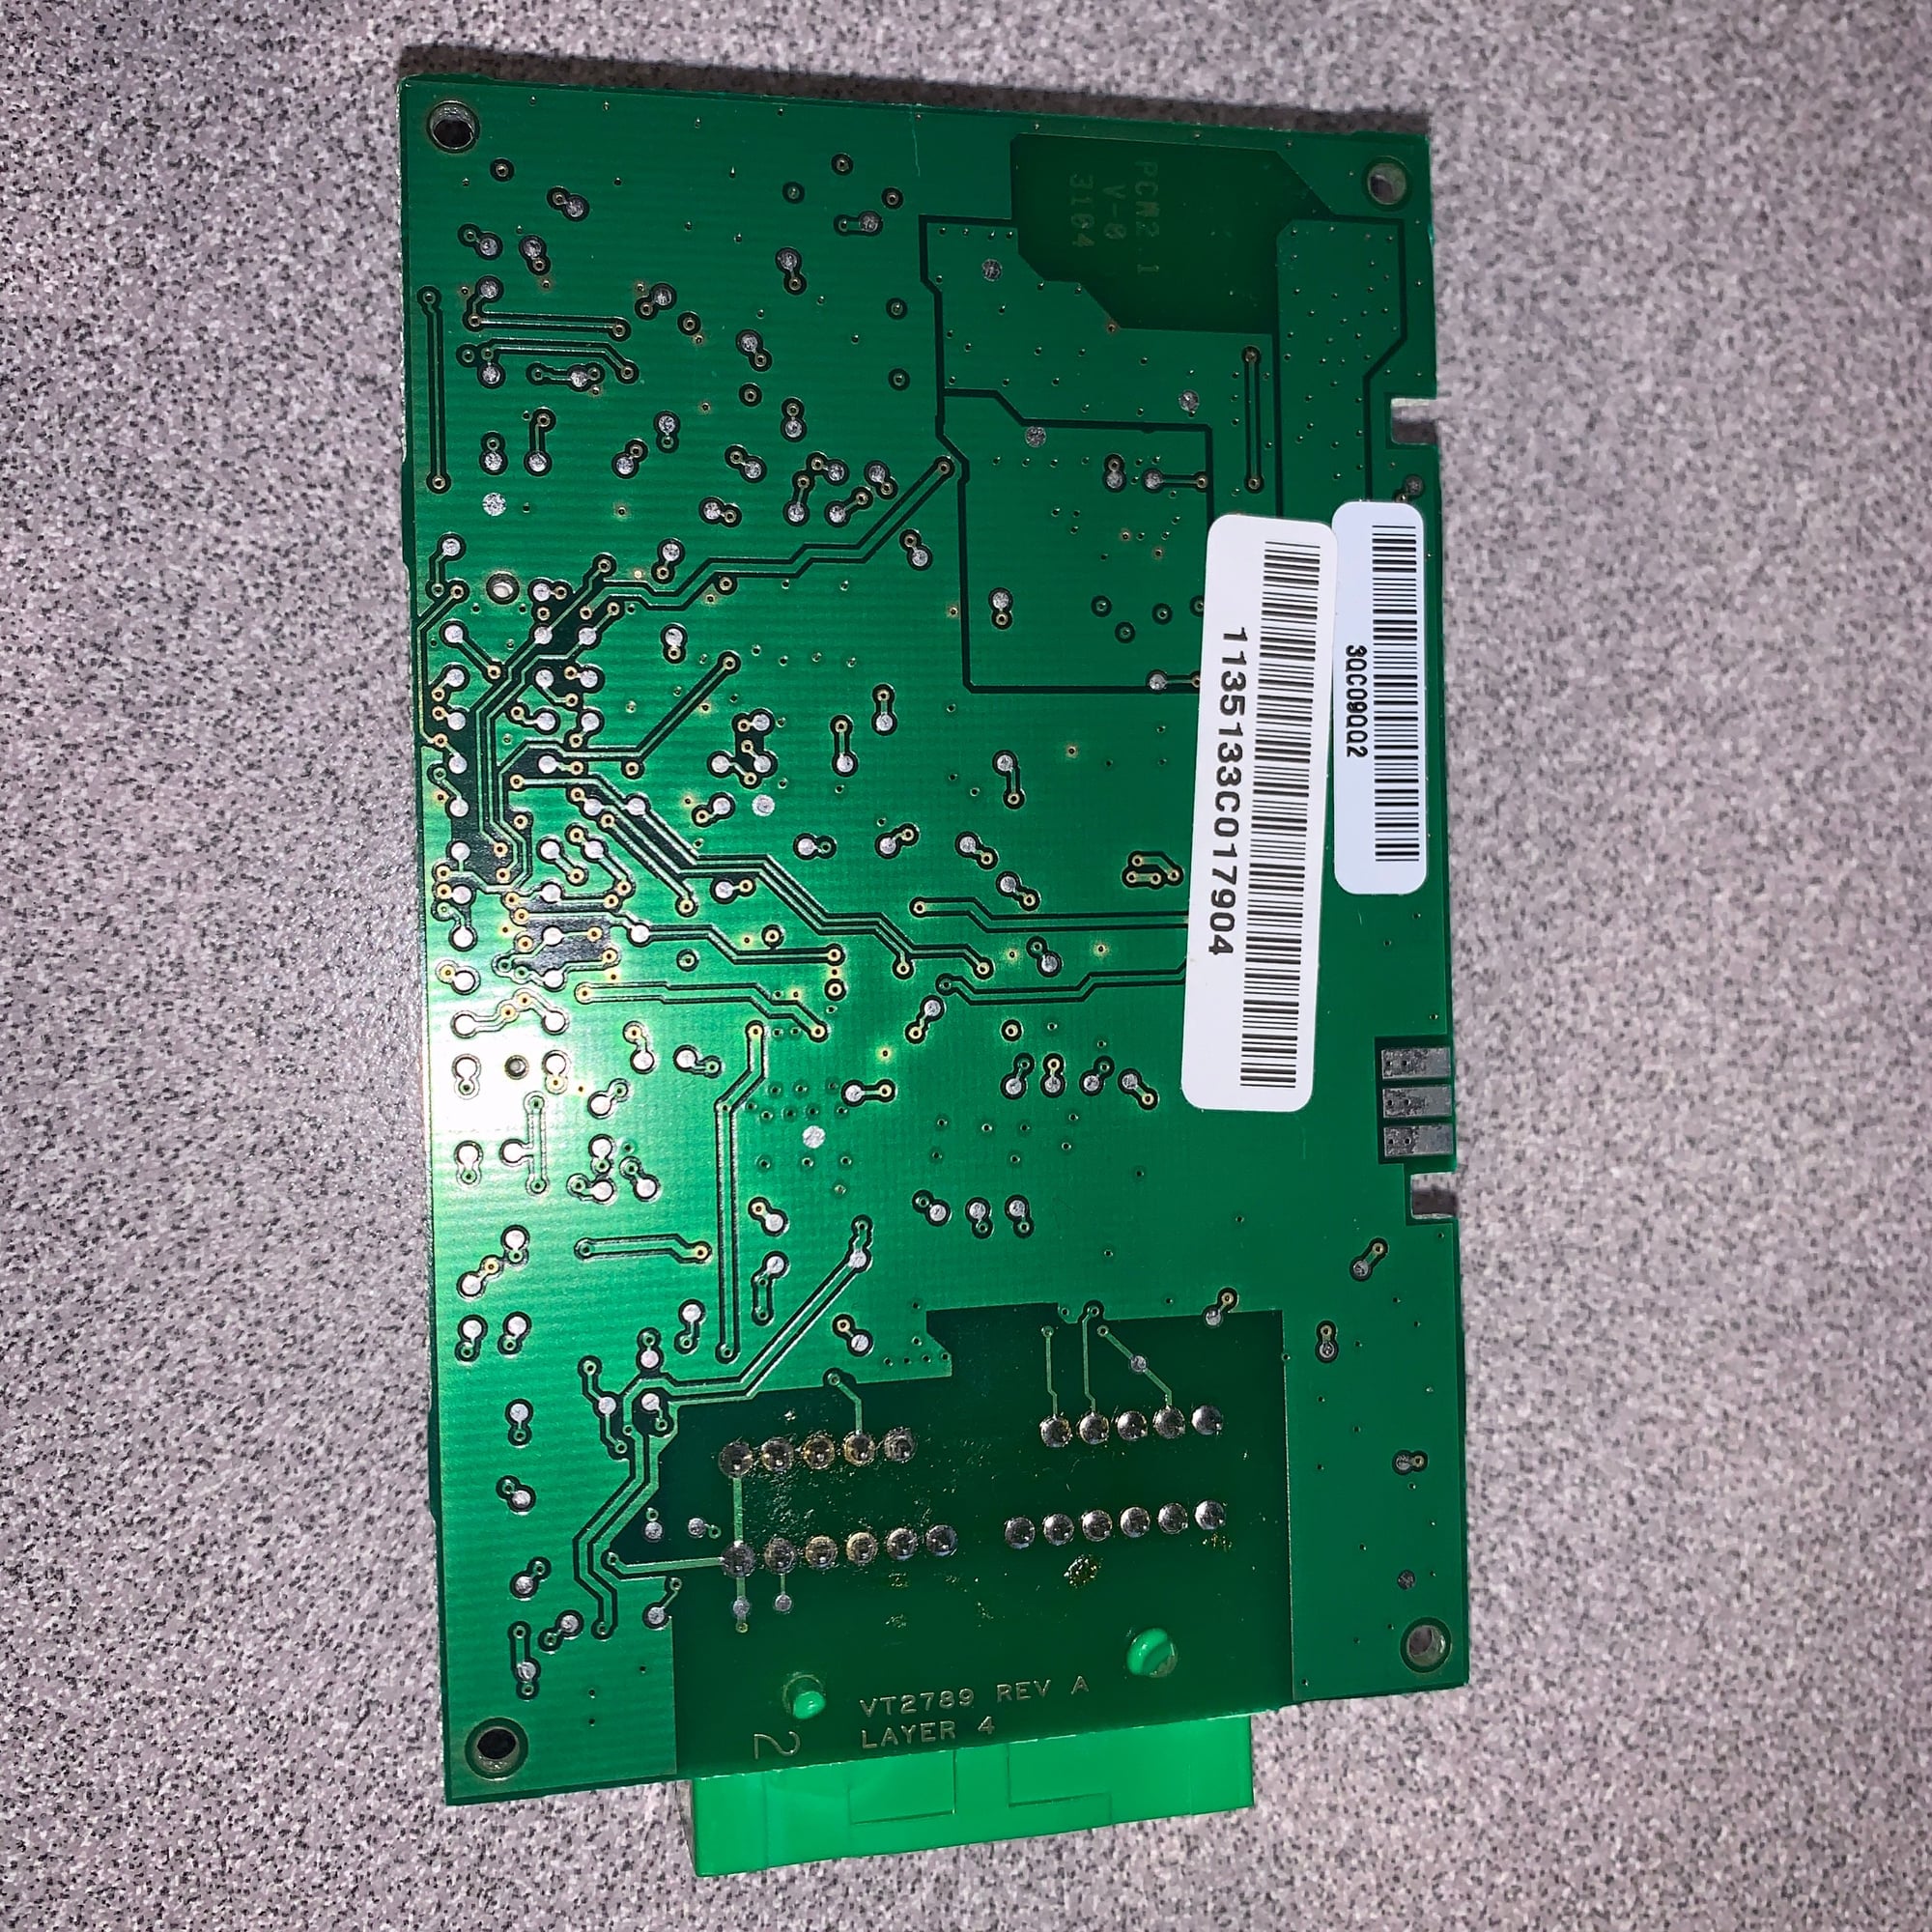 Audio Video/Electronics - FREE: FREE'ish - 2005 TL HFL Module - Unknown Condition - Used - 2004 to 2006 Acura TL - Lees Summit, MO 64081, United States